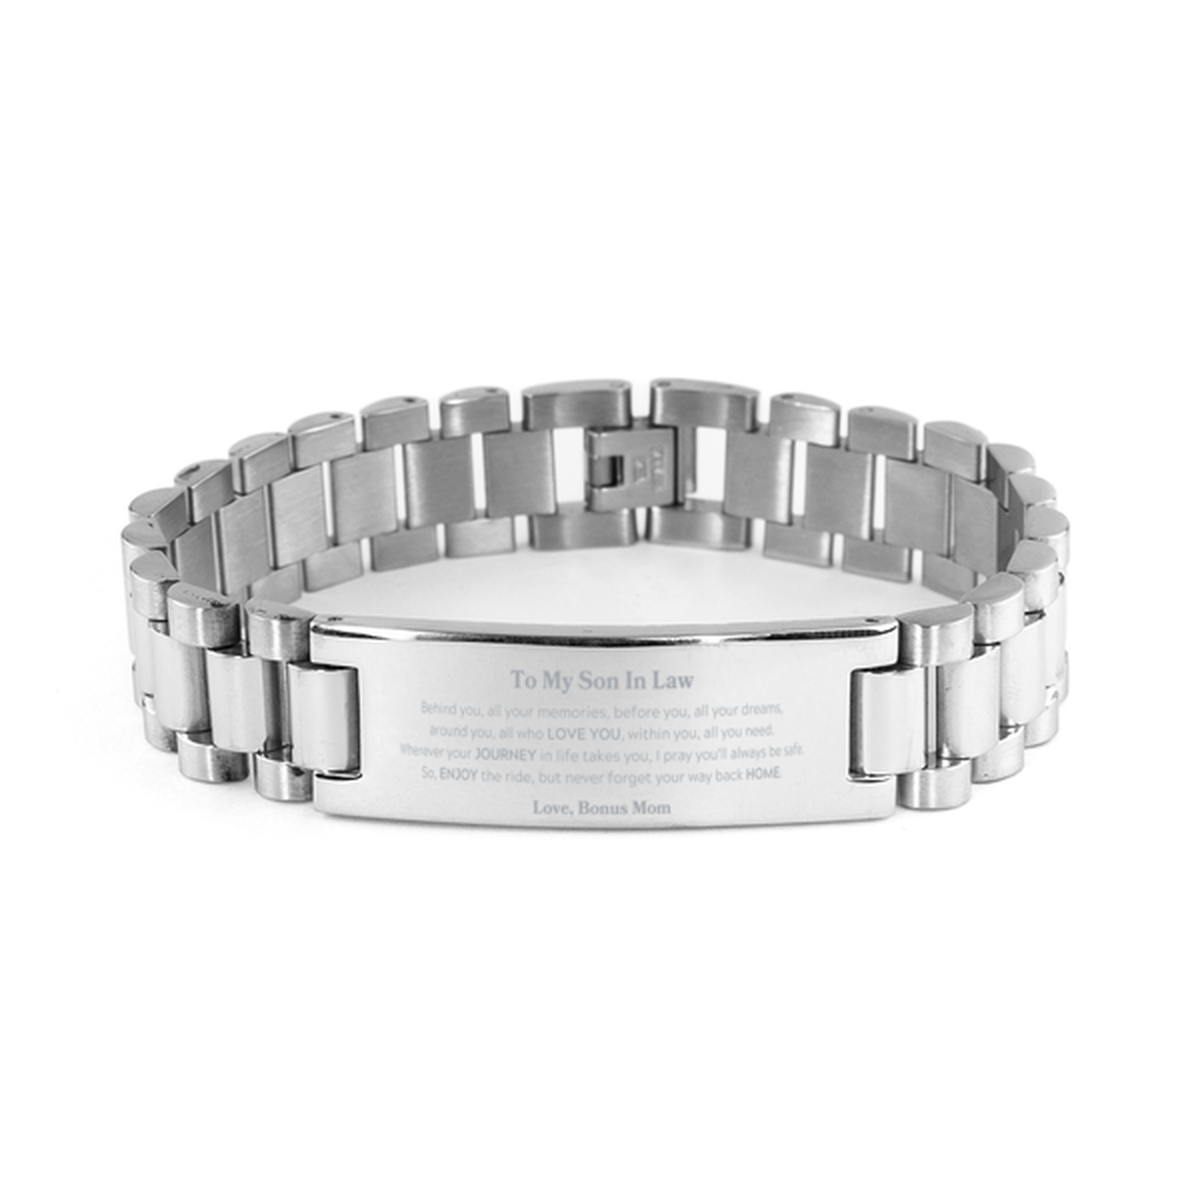 To My Son In Law Graduation Gifts from Bonus Mom, Son In Law Ladder Stainless Steel Bracelet Christmas Birthday Gifts for Son In Law Behind you, all your memories, before you, all your dreams. Love, Bonus Mom